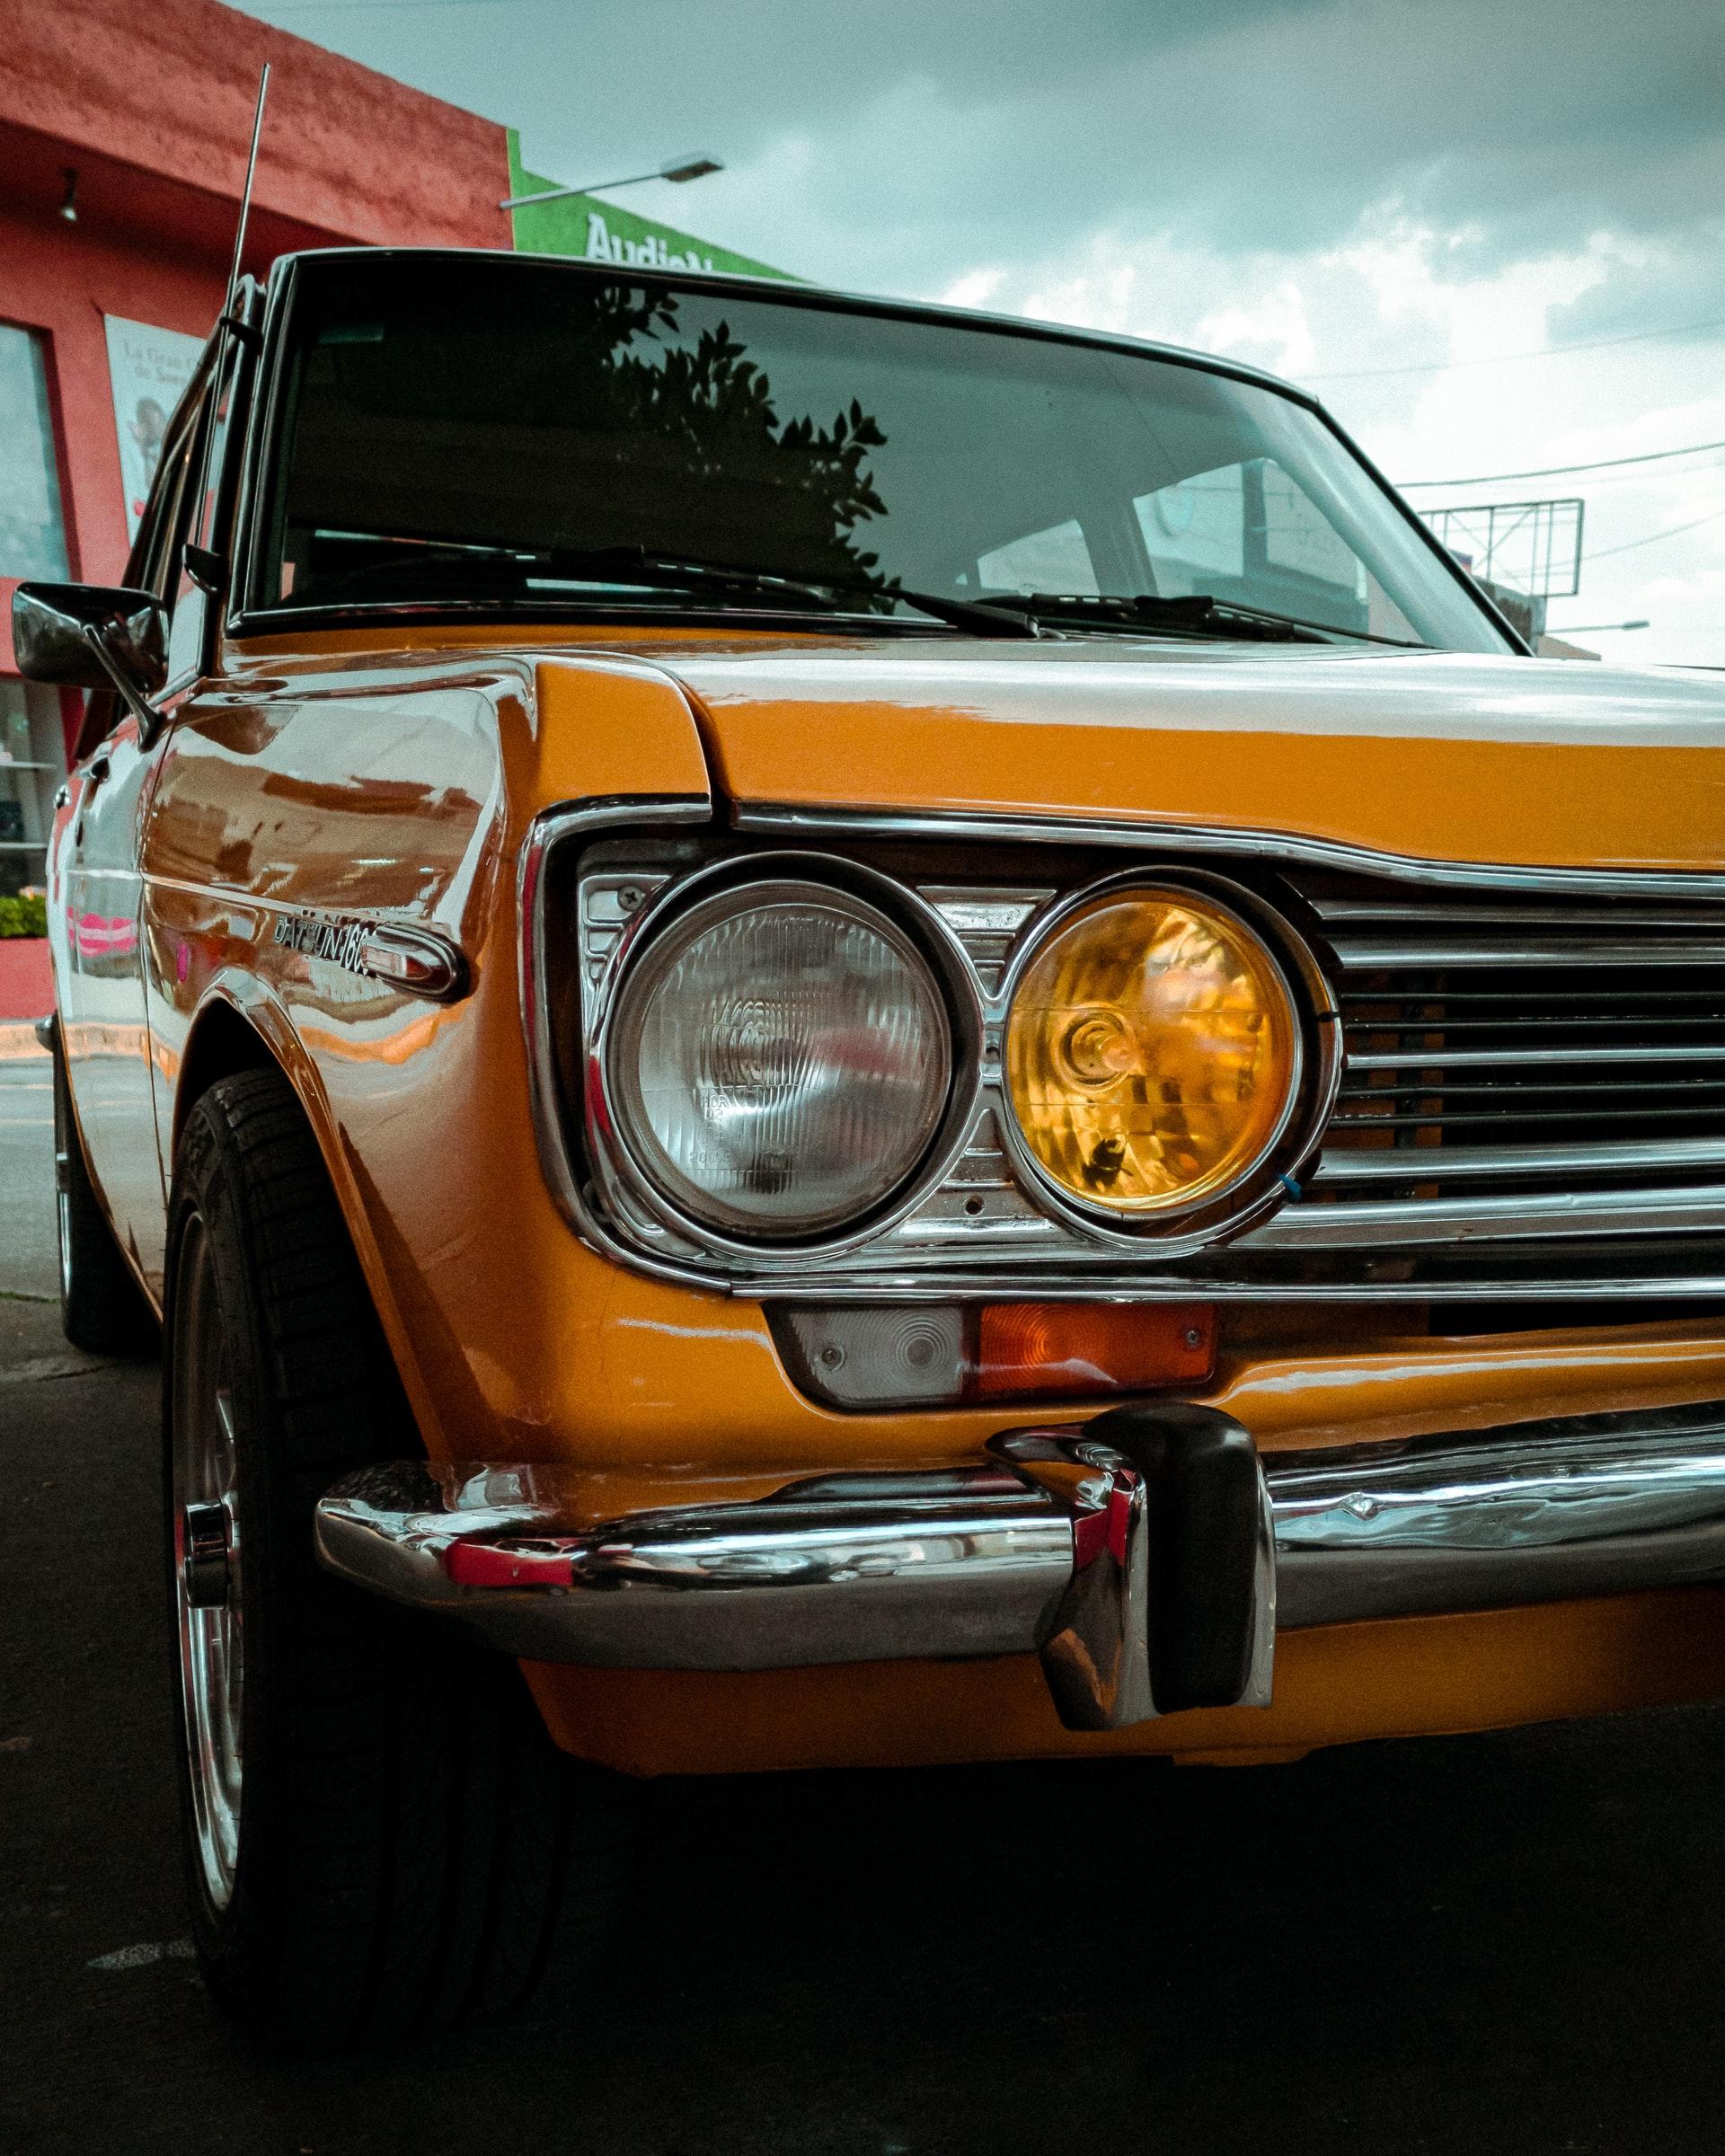 The Datsun 510 is a popular collector’s car.